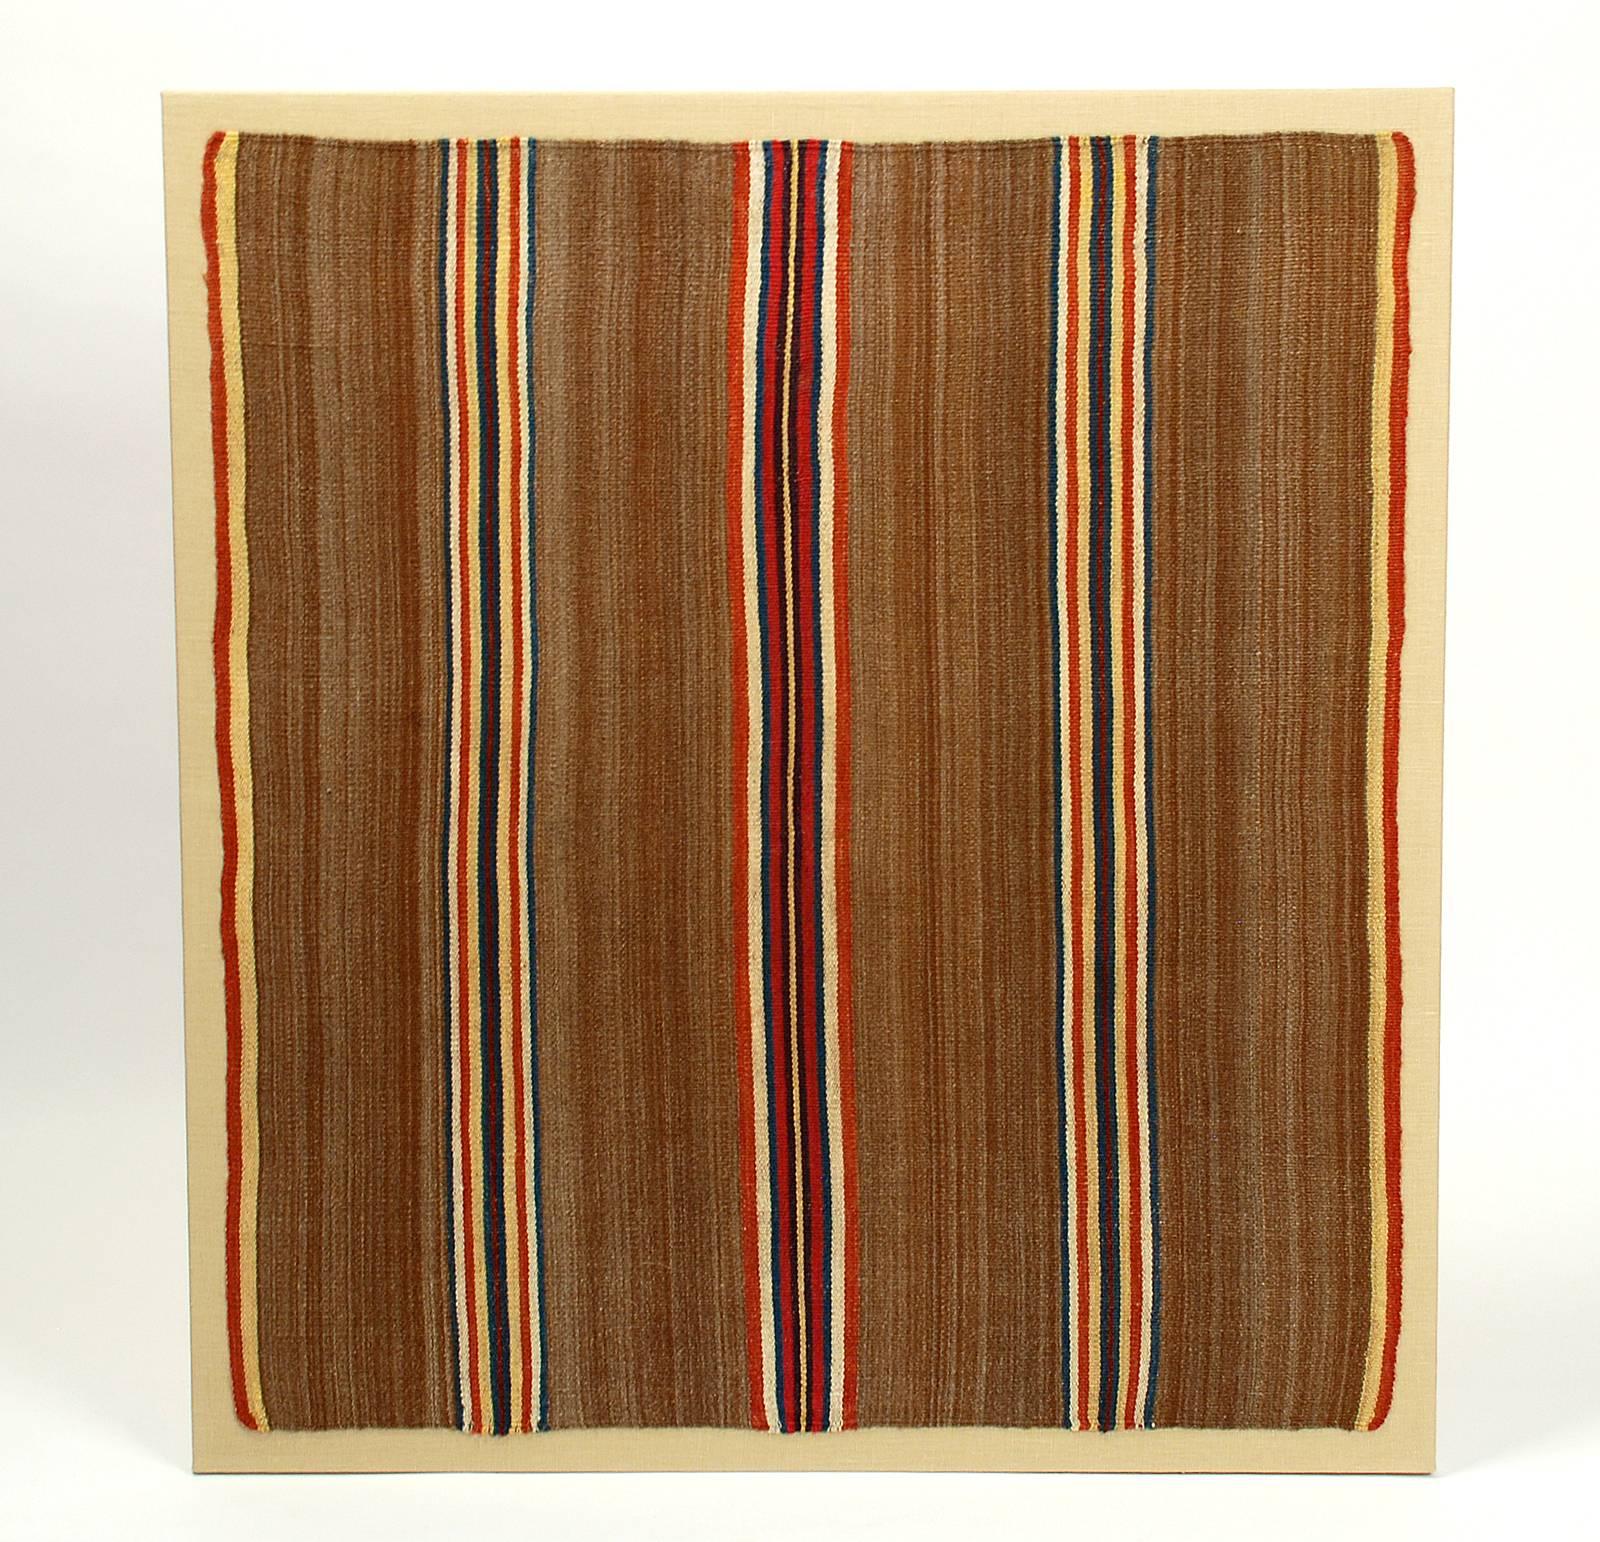 A stunning late 19th century Aymara ceremonial 'Tari' cloth (ceremonial ground shaman's cloth) from the Pacajes region of Bolivia, Department of La Paz - circa 1880. All natural dyes. Three channels of vertical stripes against a field of beautifully